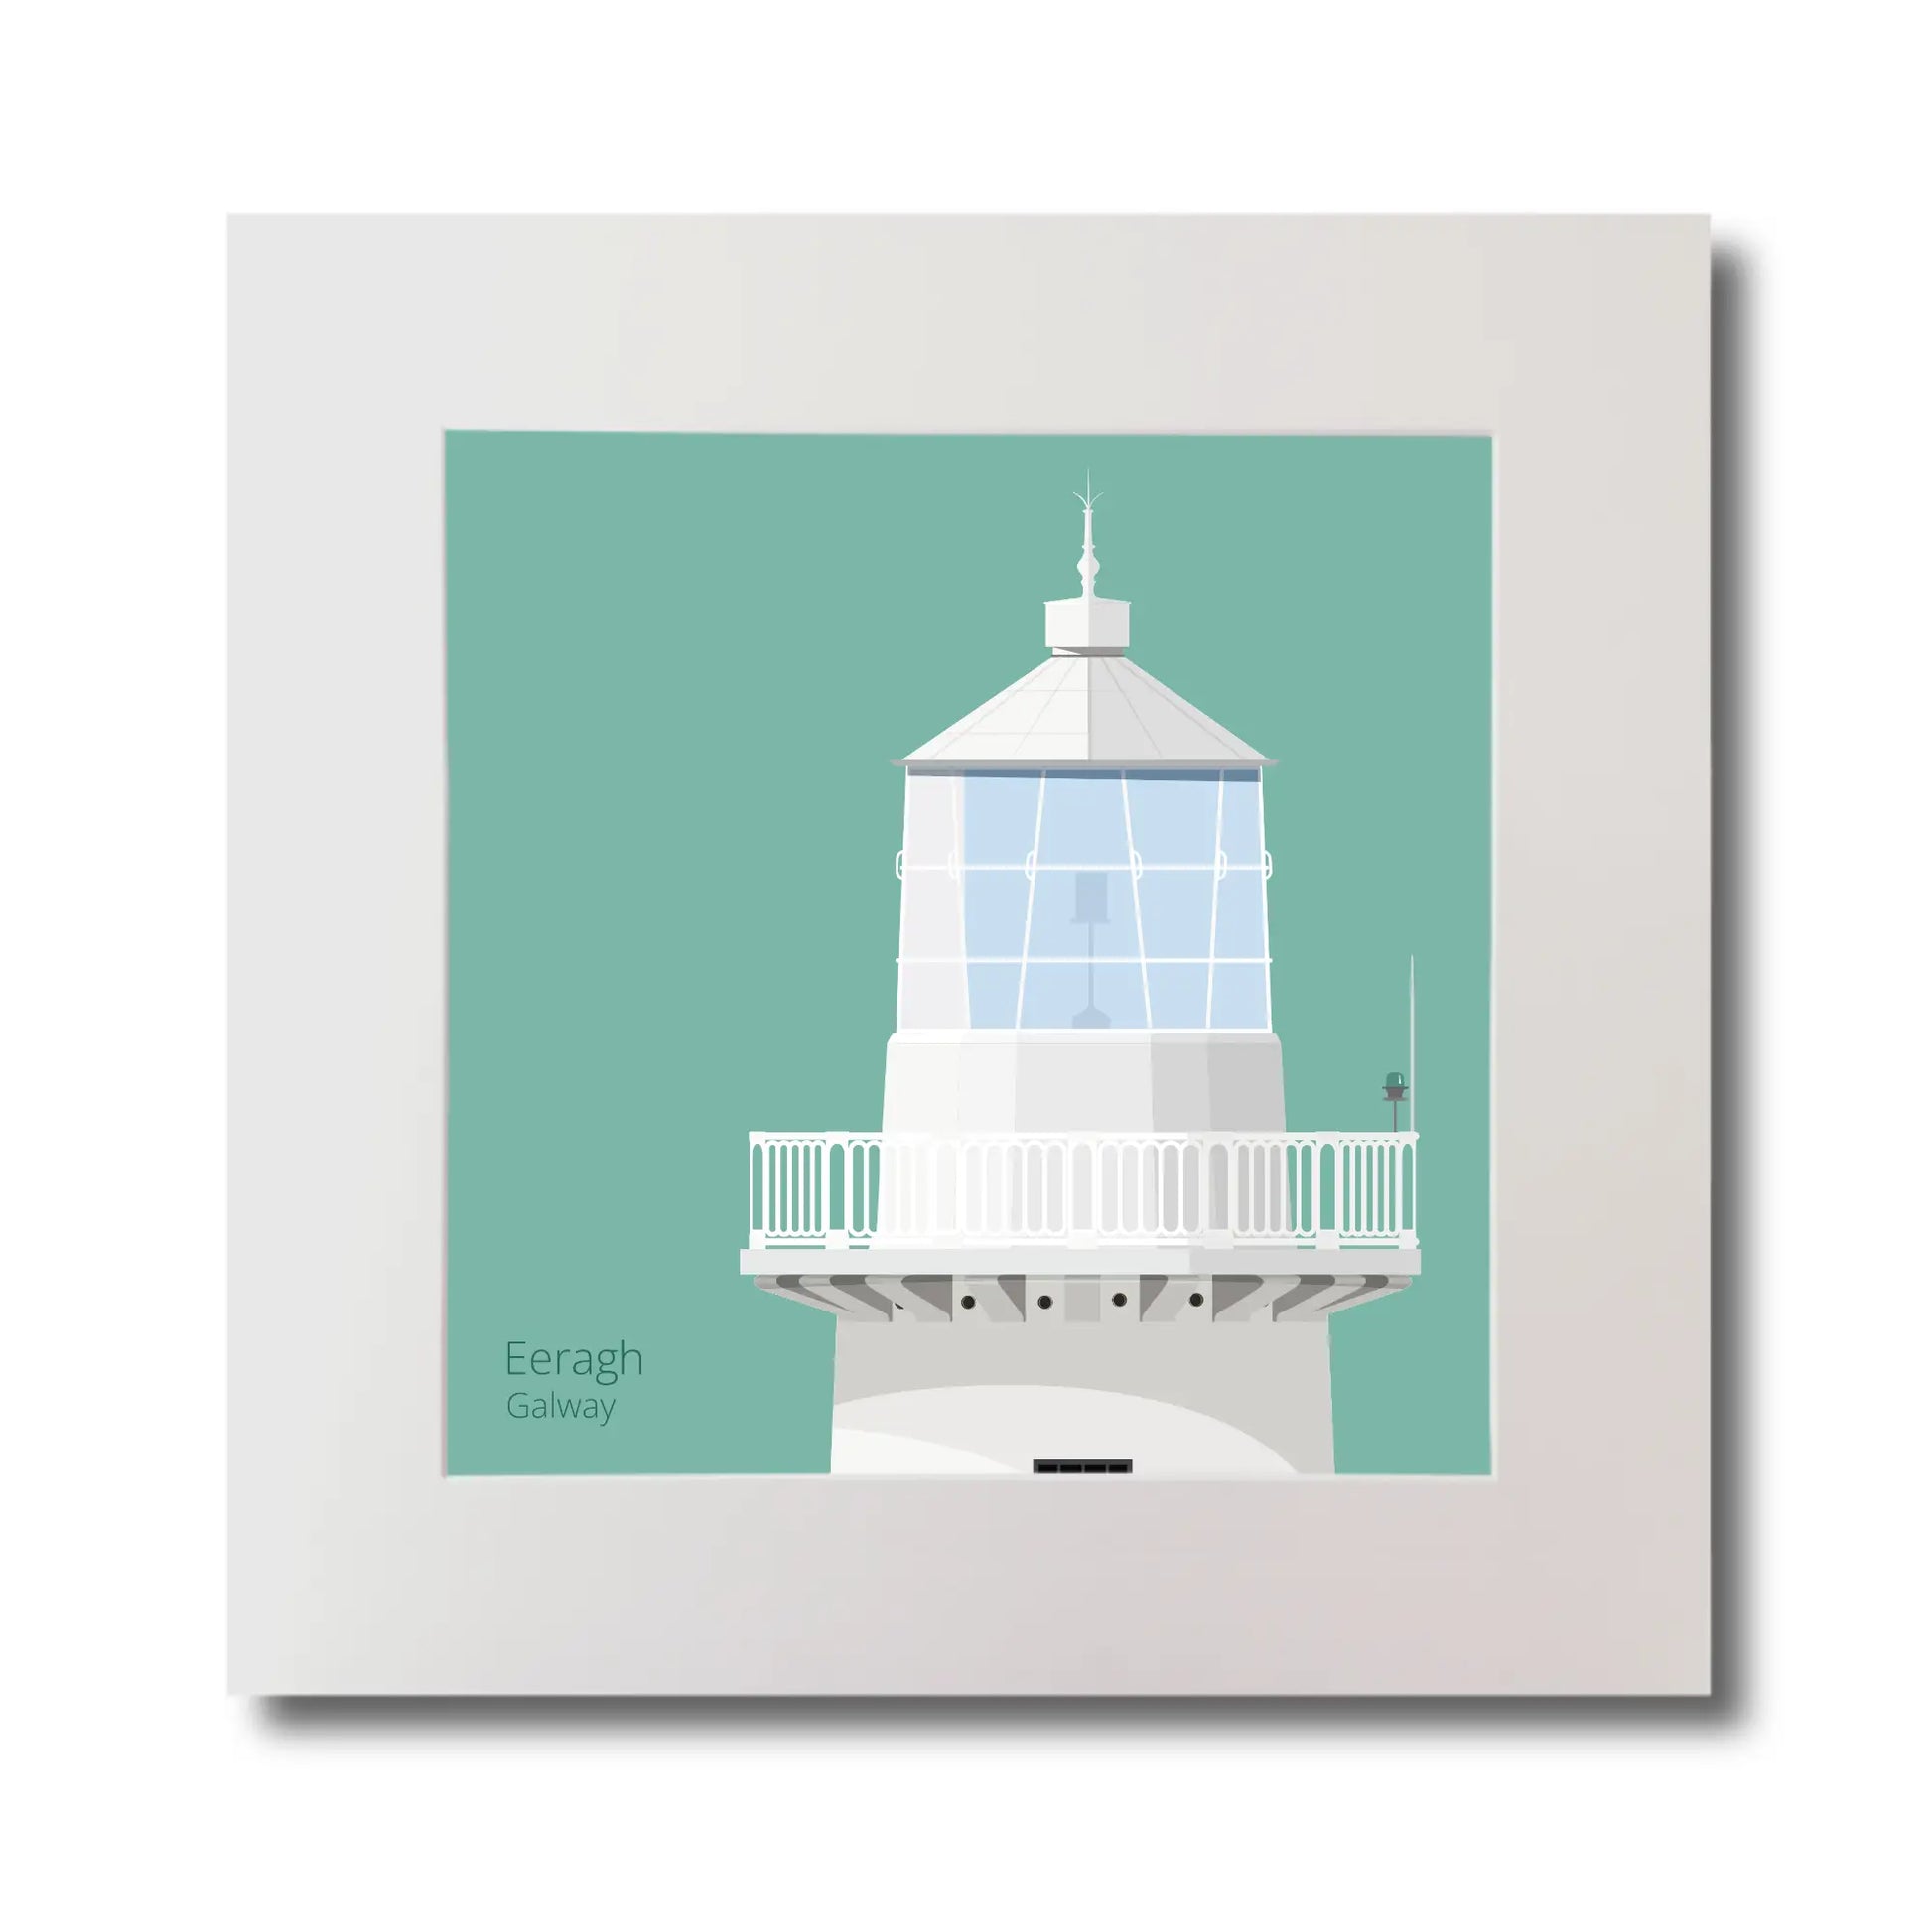 Illustration Eeragh lighthouse on an ocean green background, mounted and measuring 30x30cm.